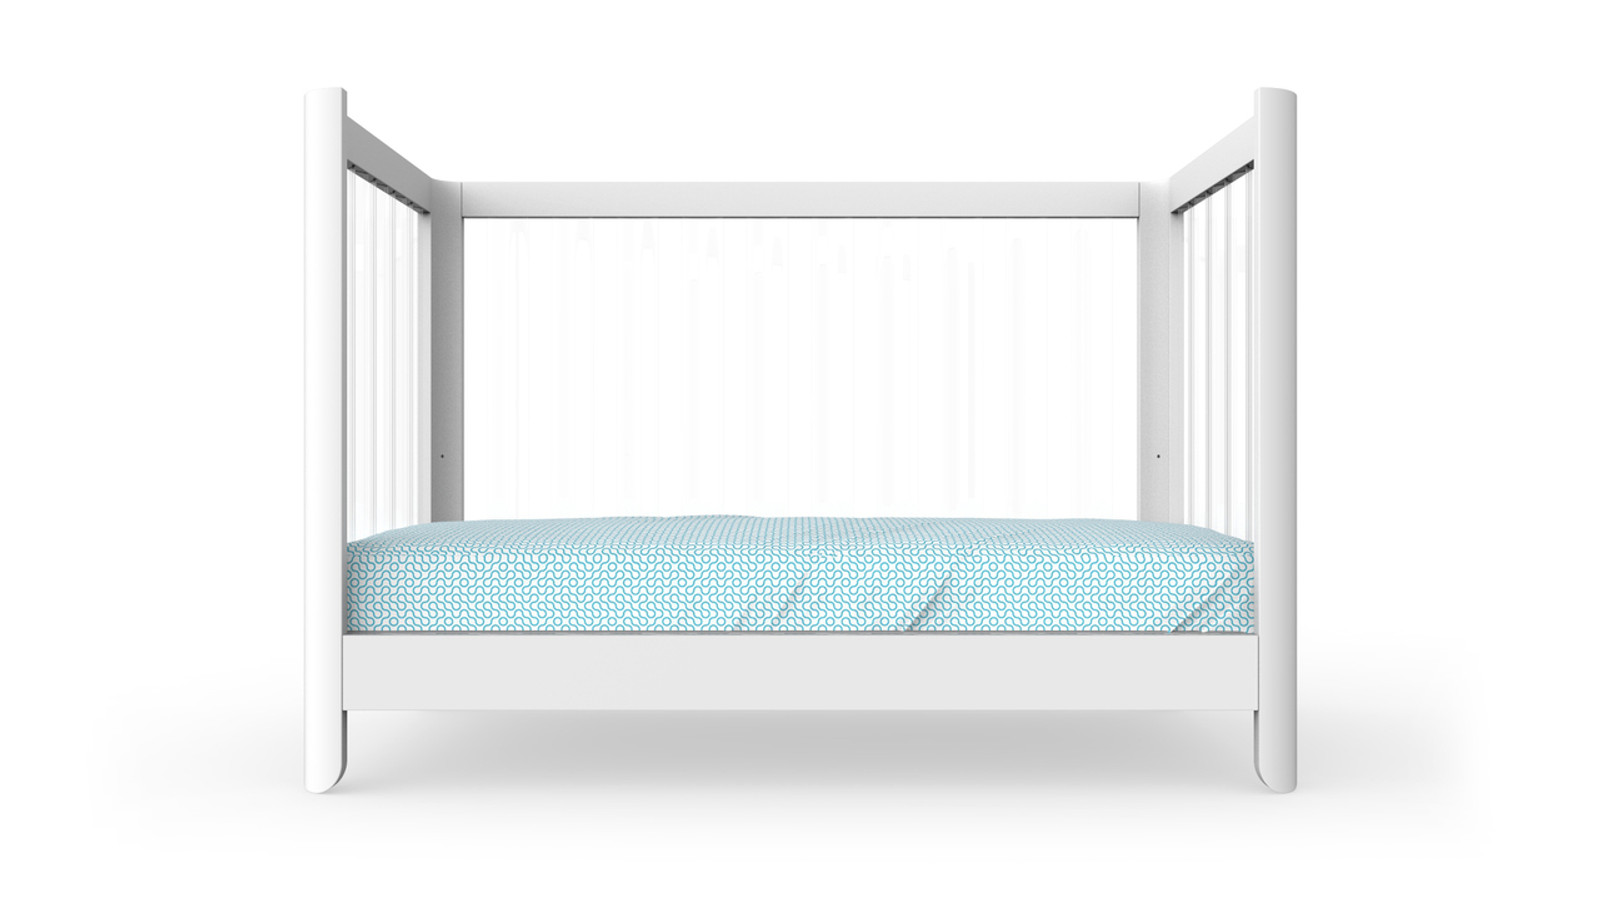 Reverie Crib shown converted for Daybed